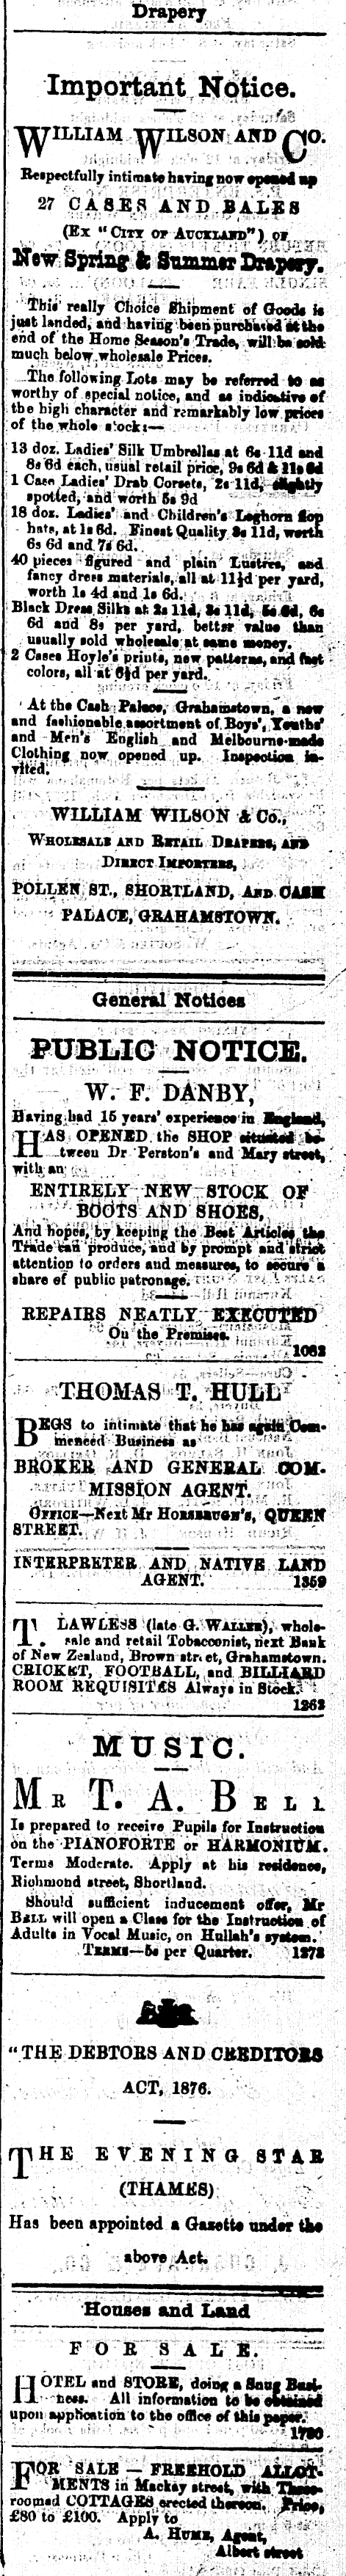 Papers Past Newspapers Thames Star 11 January 1878 Page 1 Advertisements Column 6